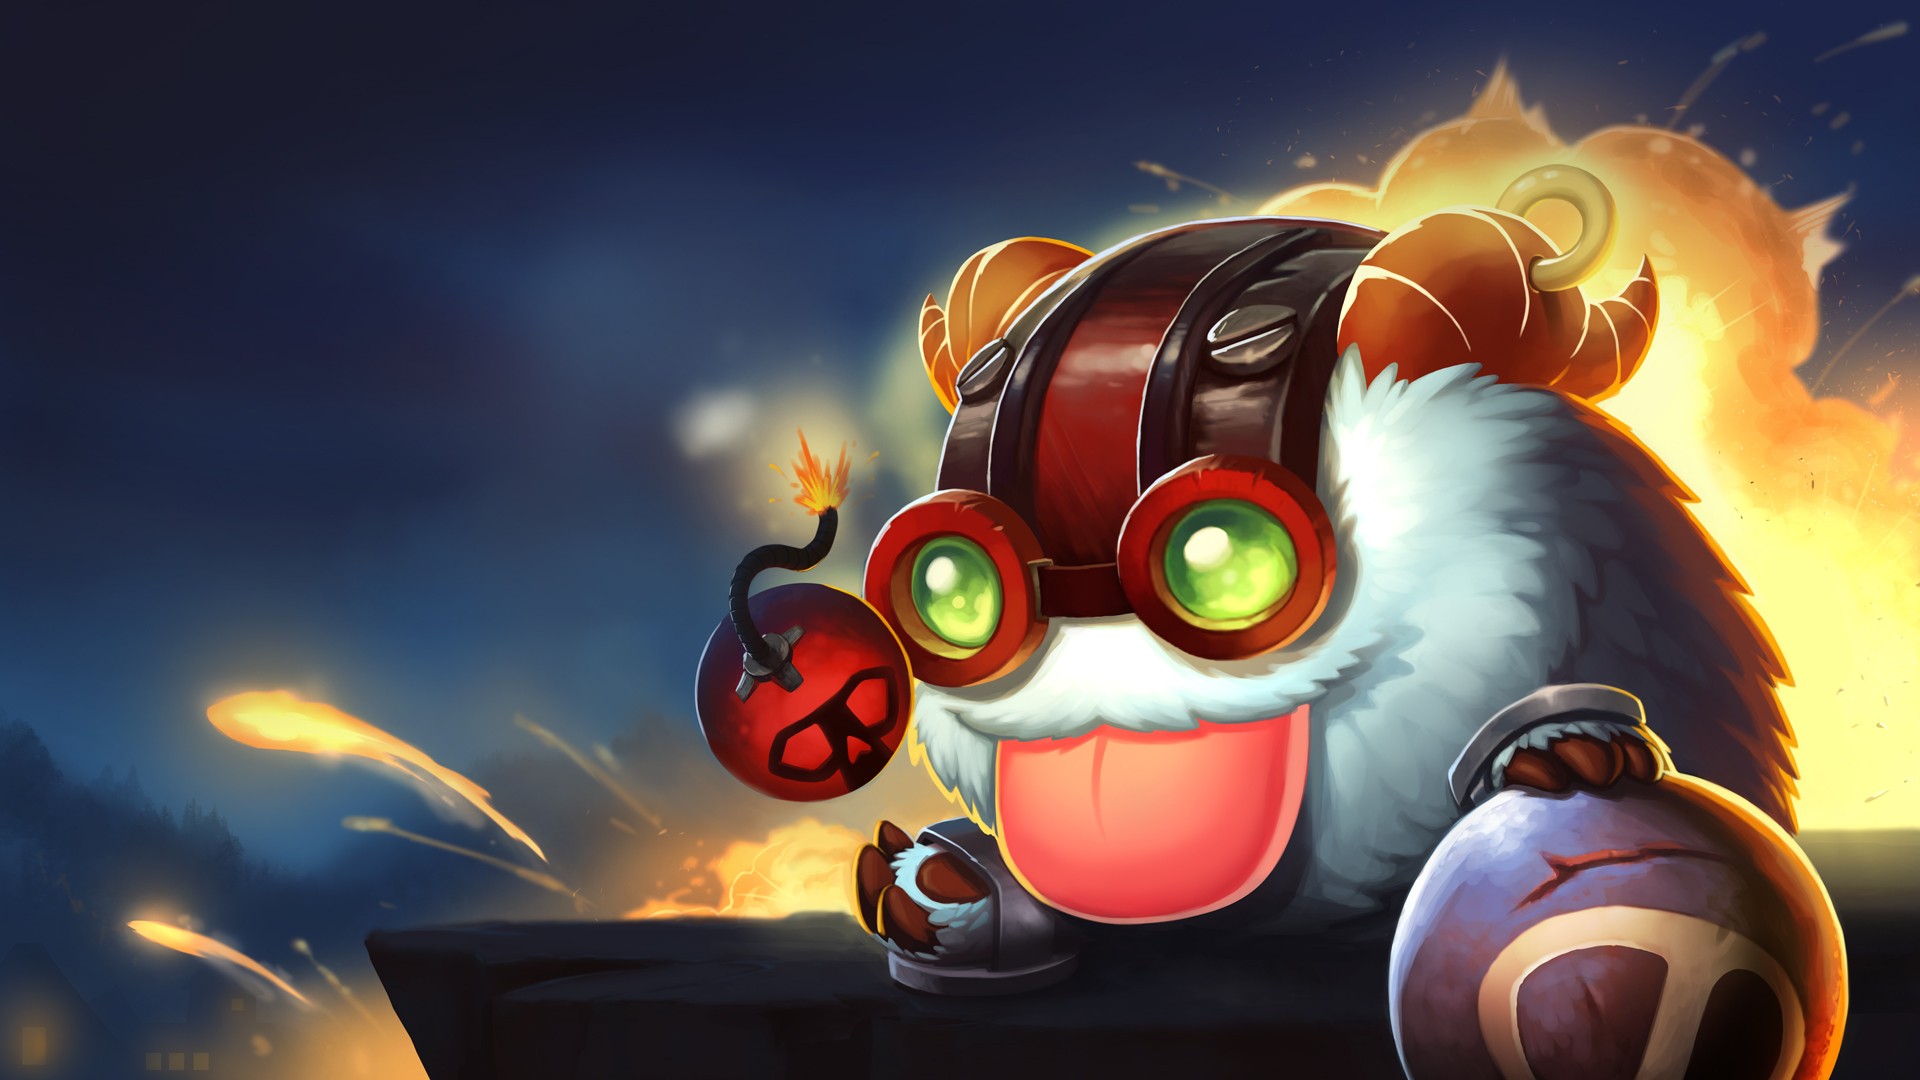 General 1920x1080 League of Legends Poro (League of Legends) Ziggs (League of Legends) video game art PC gaming video game characters